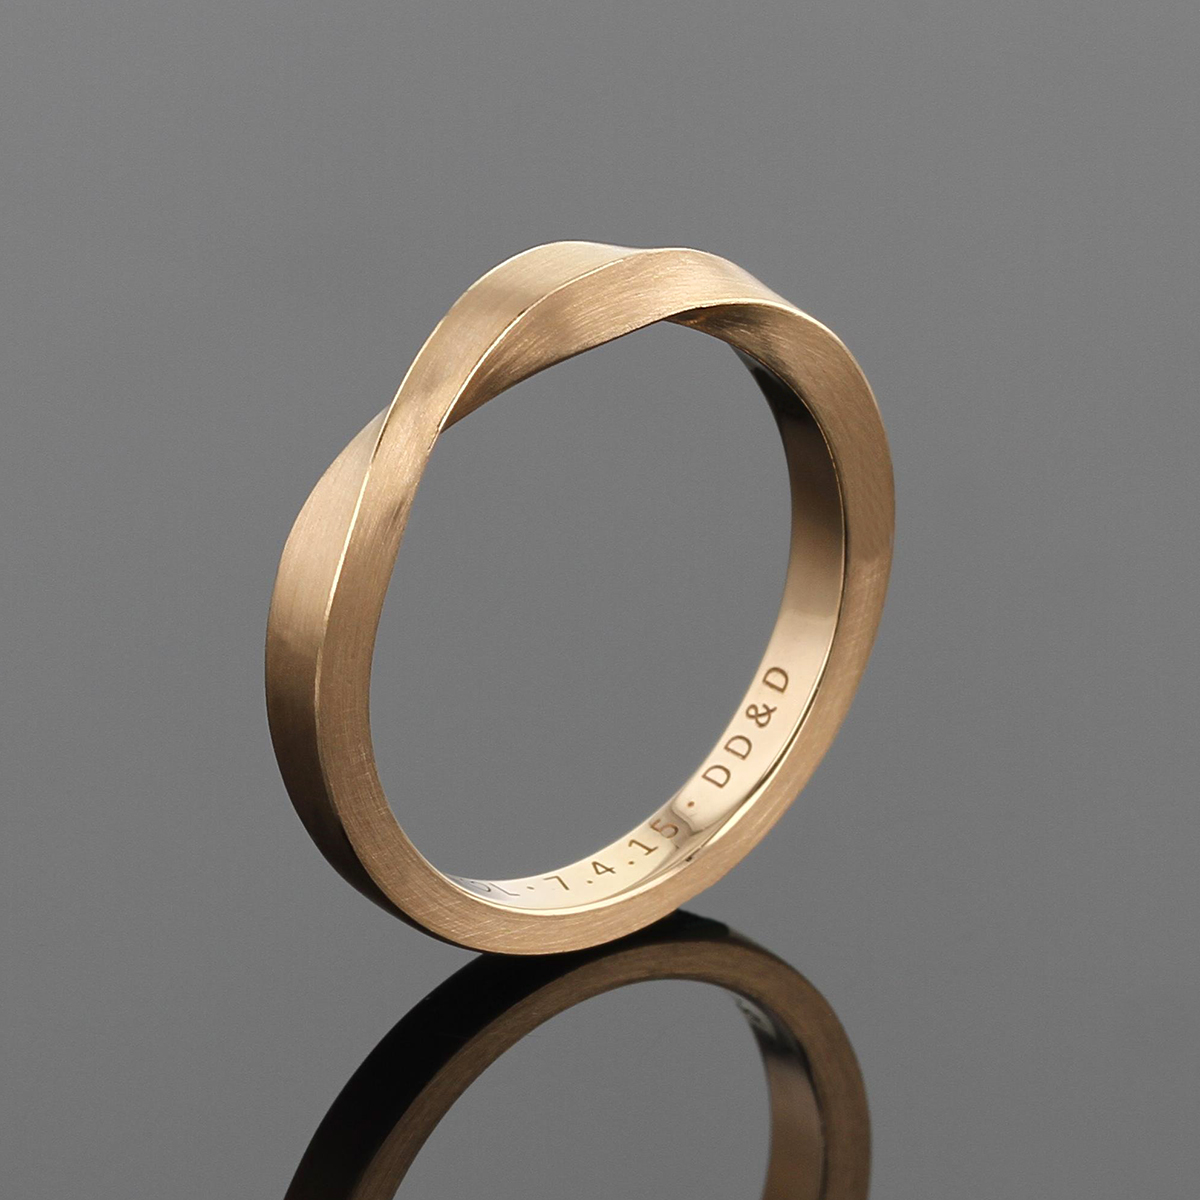 Wedding band in rose gold with a twist at the top of the ring.